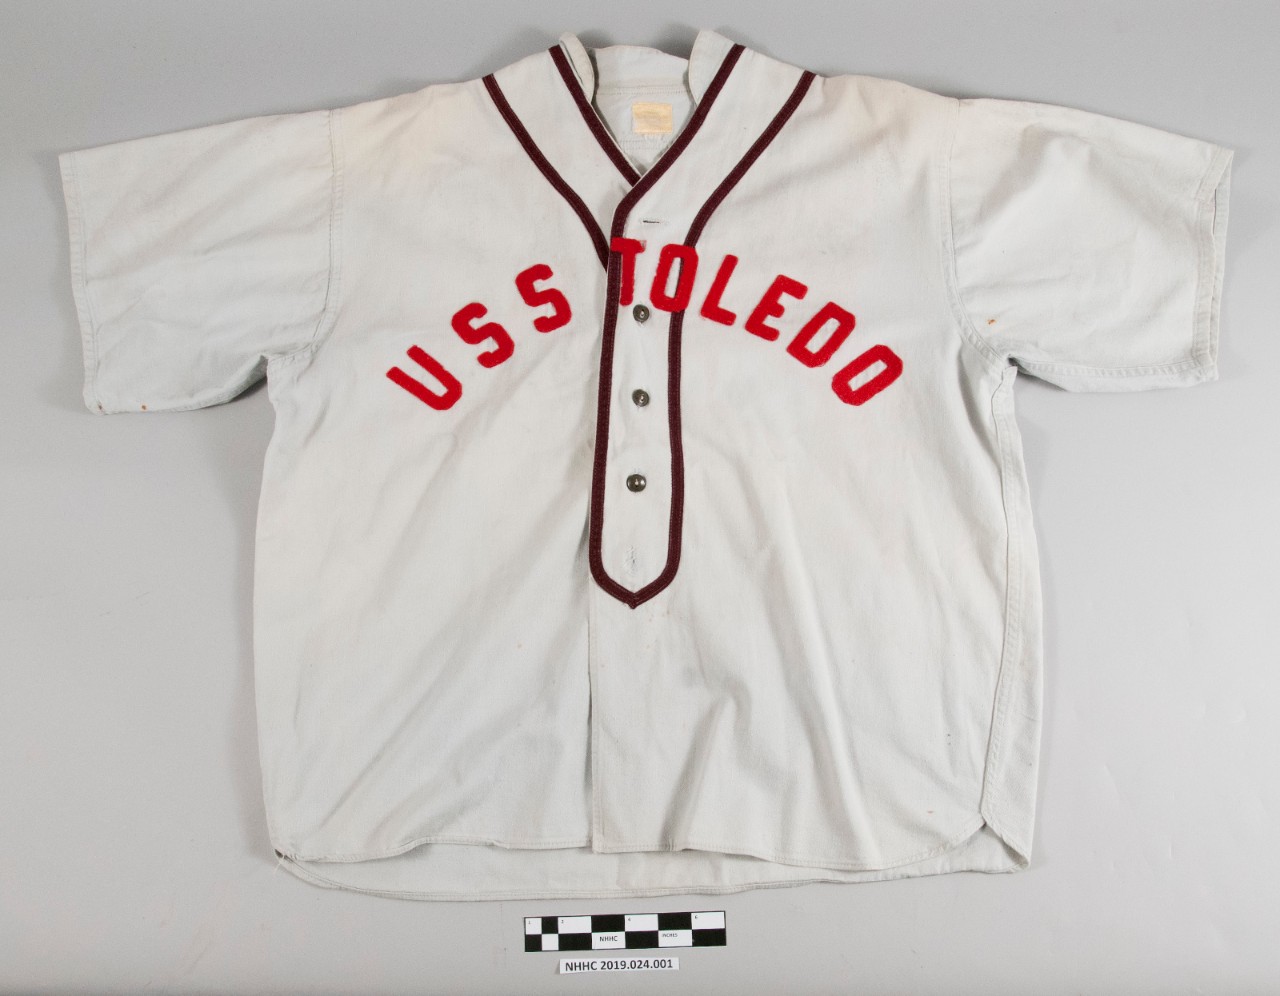 Obverse view of the baseball uniform blouse. Off-white in color with red lettering "USS Toledo." Two brown stripes around the collar of the blouse. Four brown plastic buttons on the obverse.